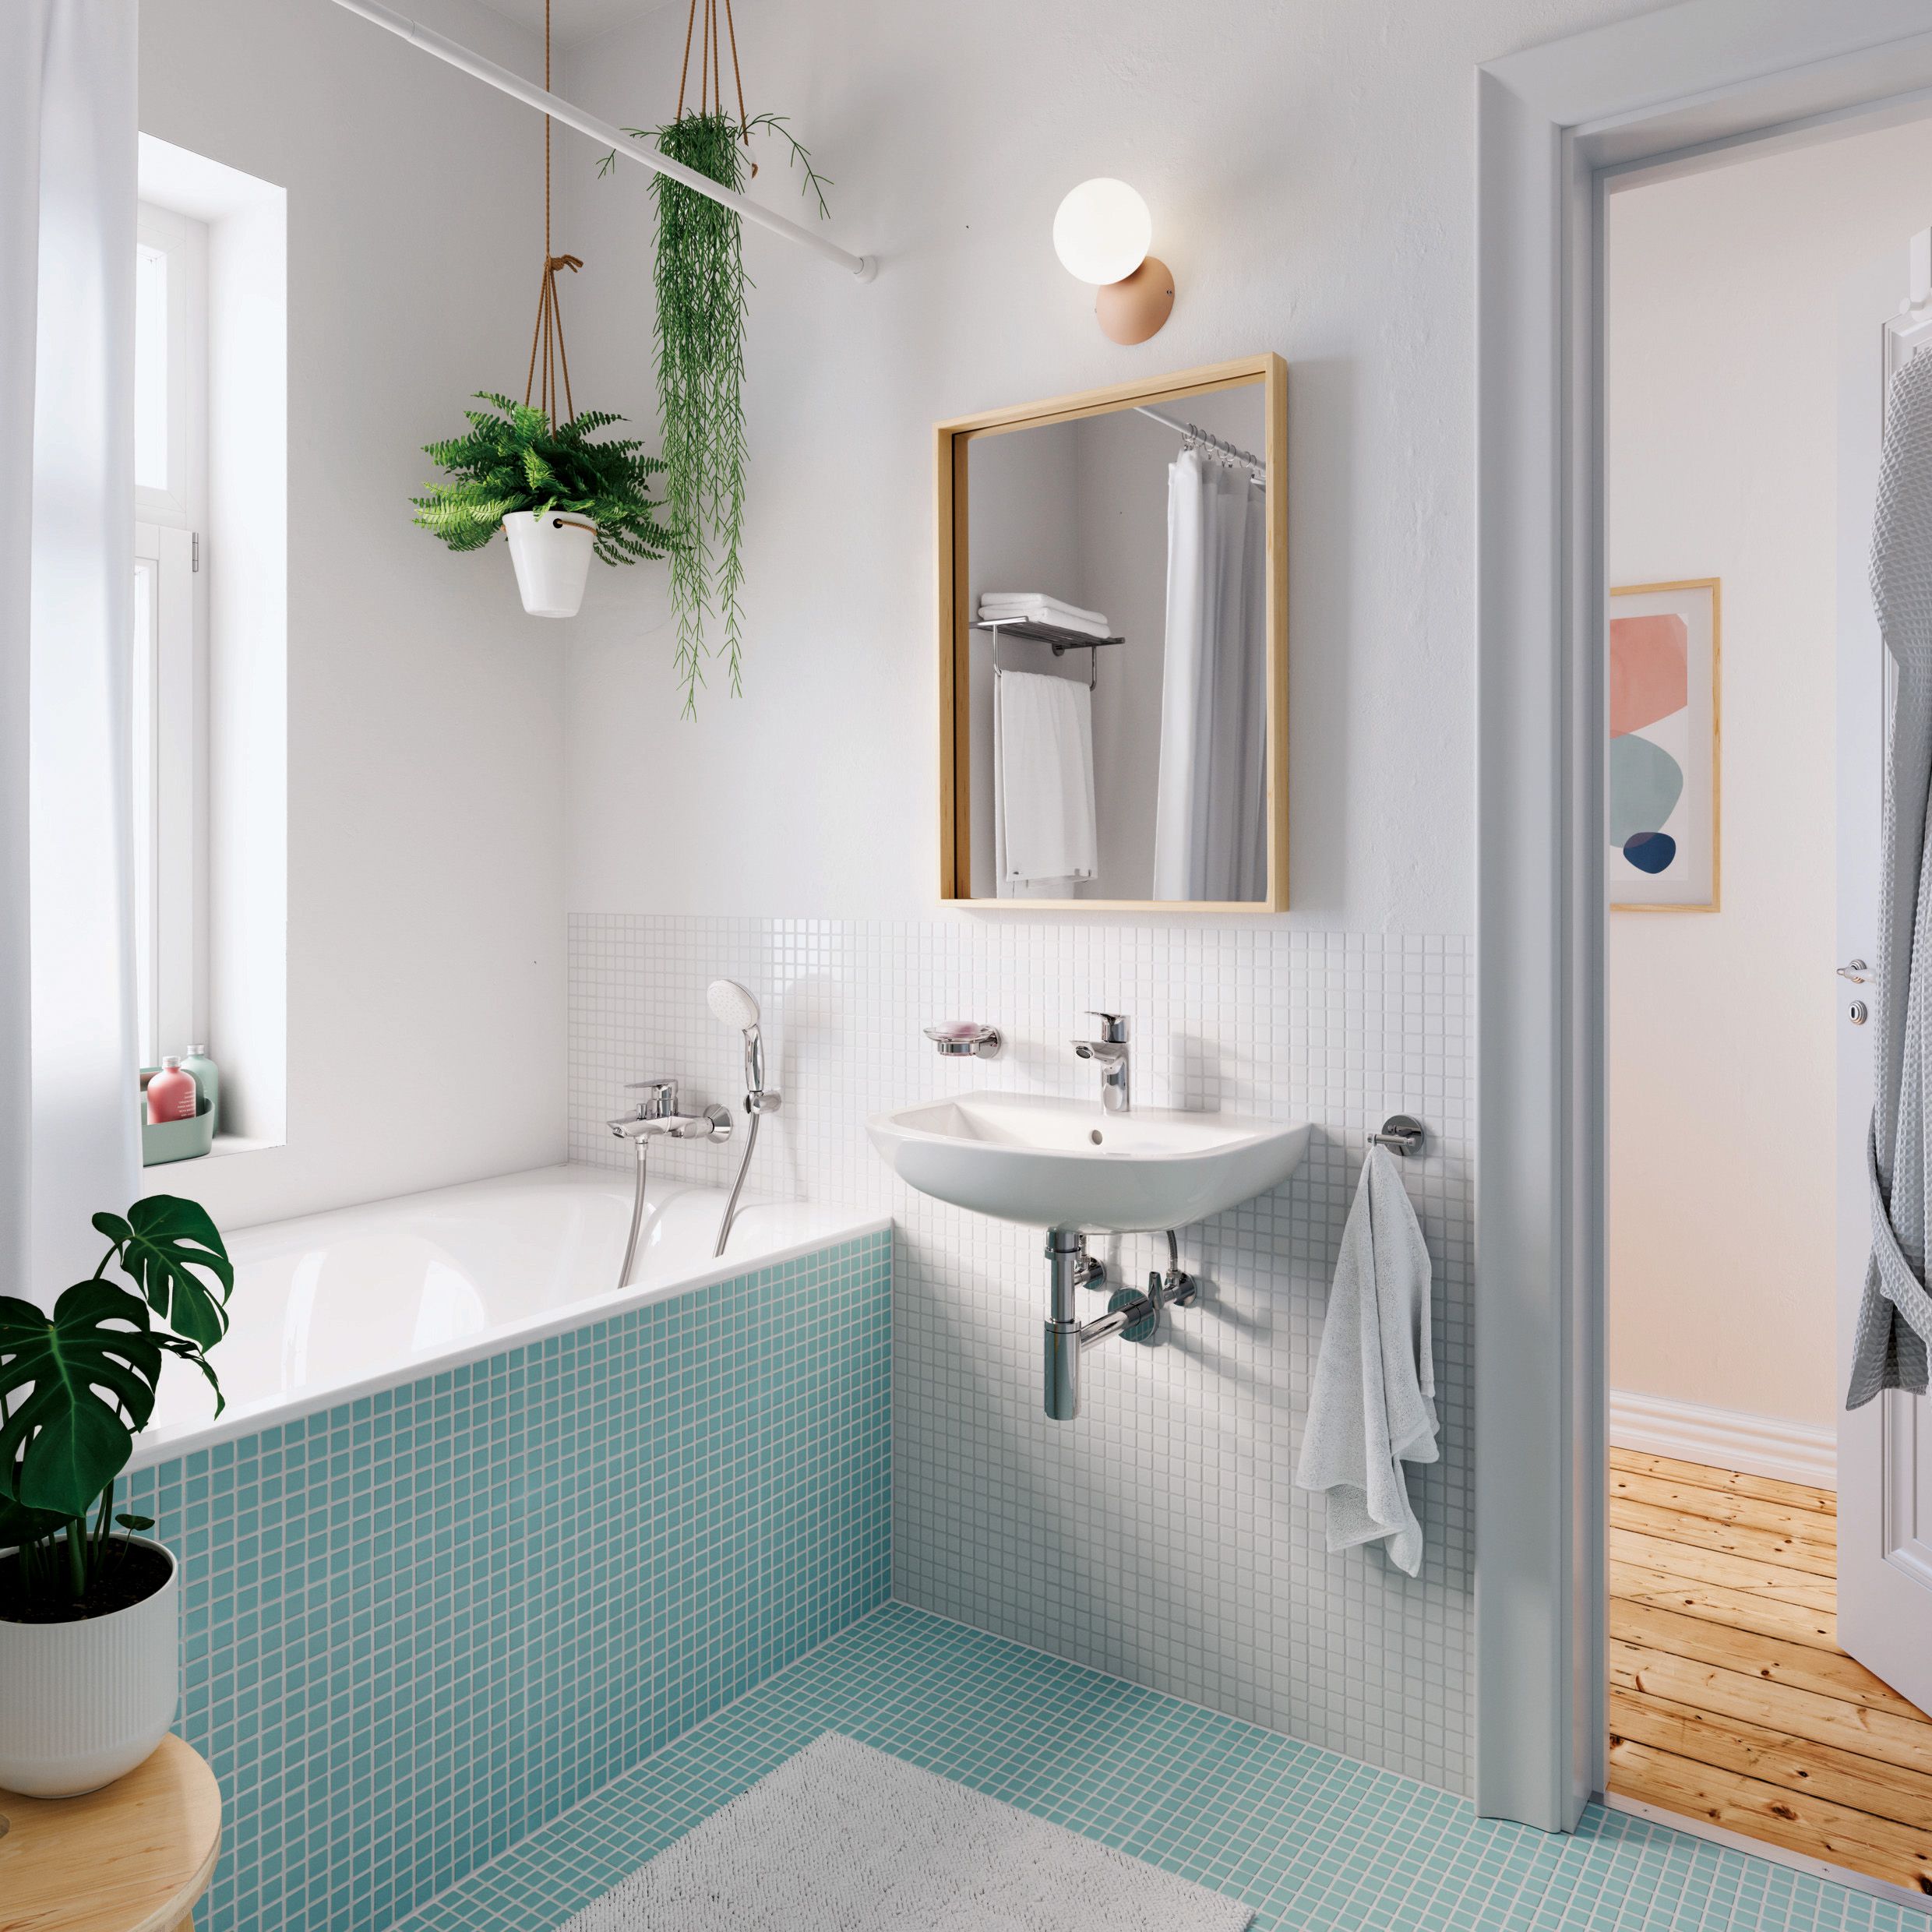 Small decorating a small bathroom ideas on a budget